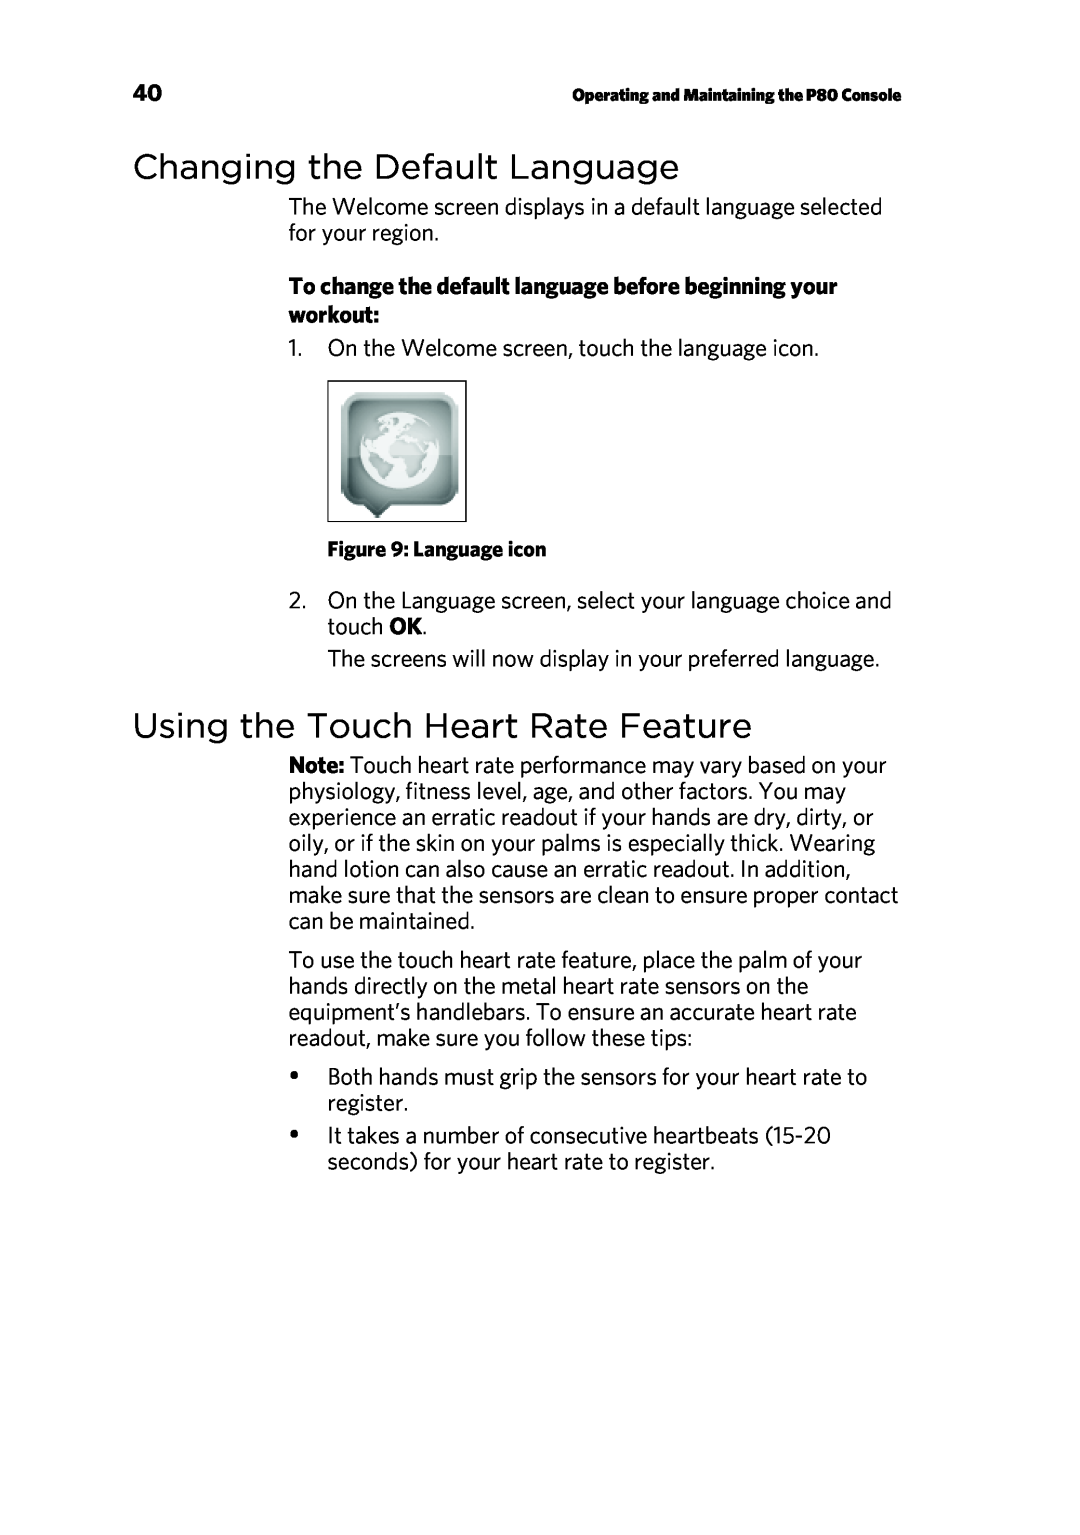 Precor P80 manual Changing the Default Language, Using the Touch Heart Rate Feature 